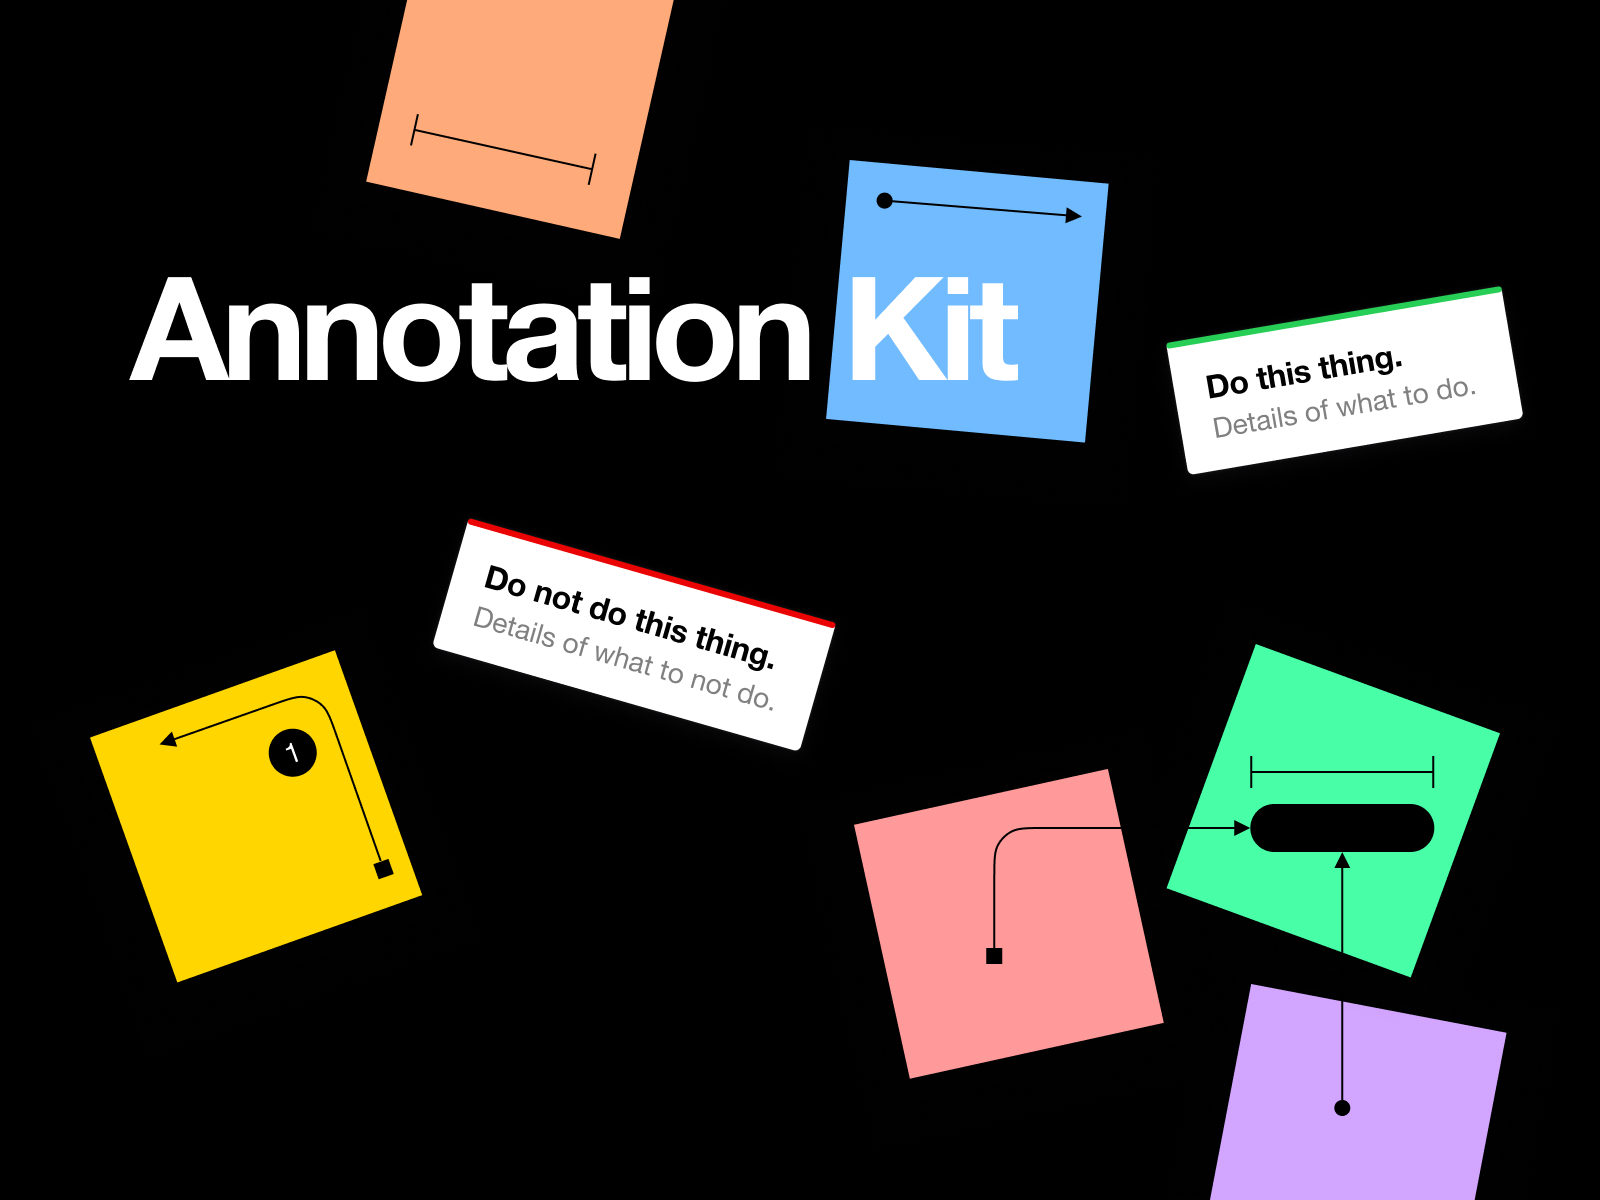 Annotation Kit 2.0 by Mixpanel on Dribbble